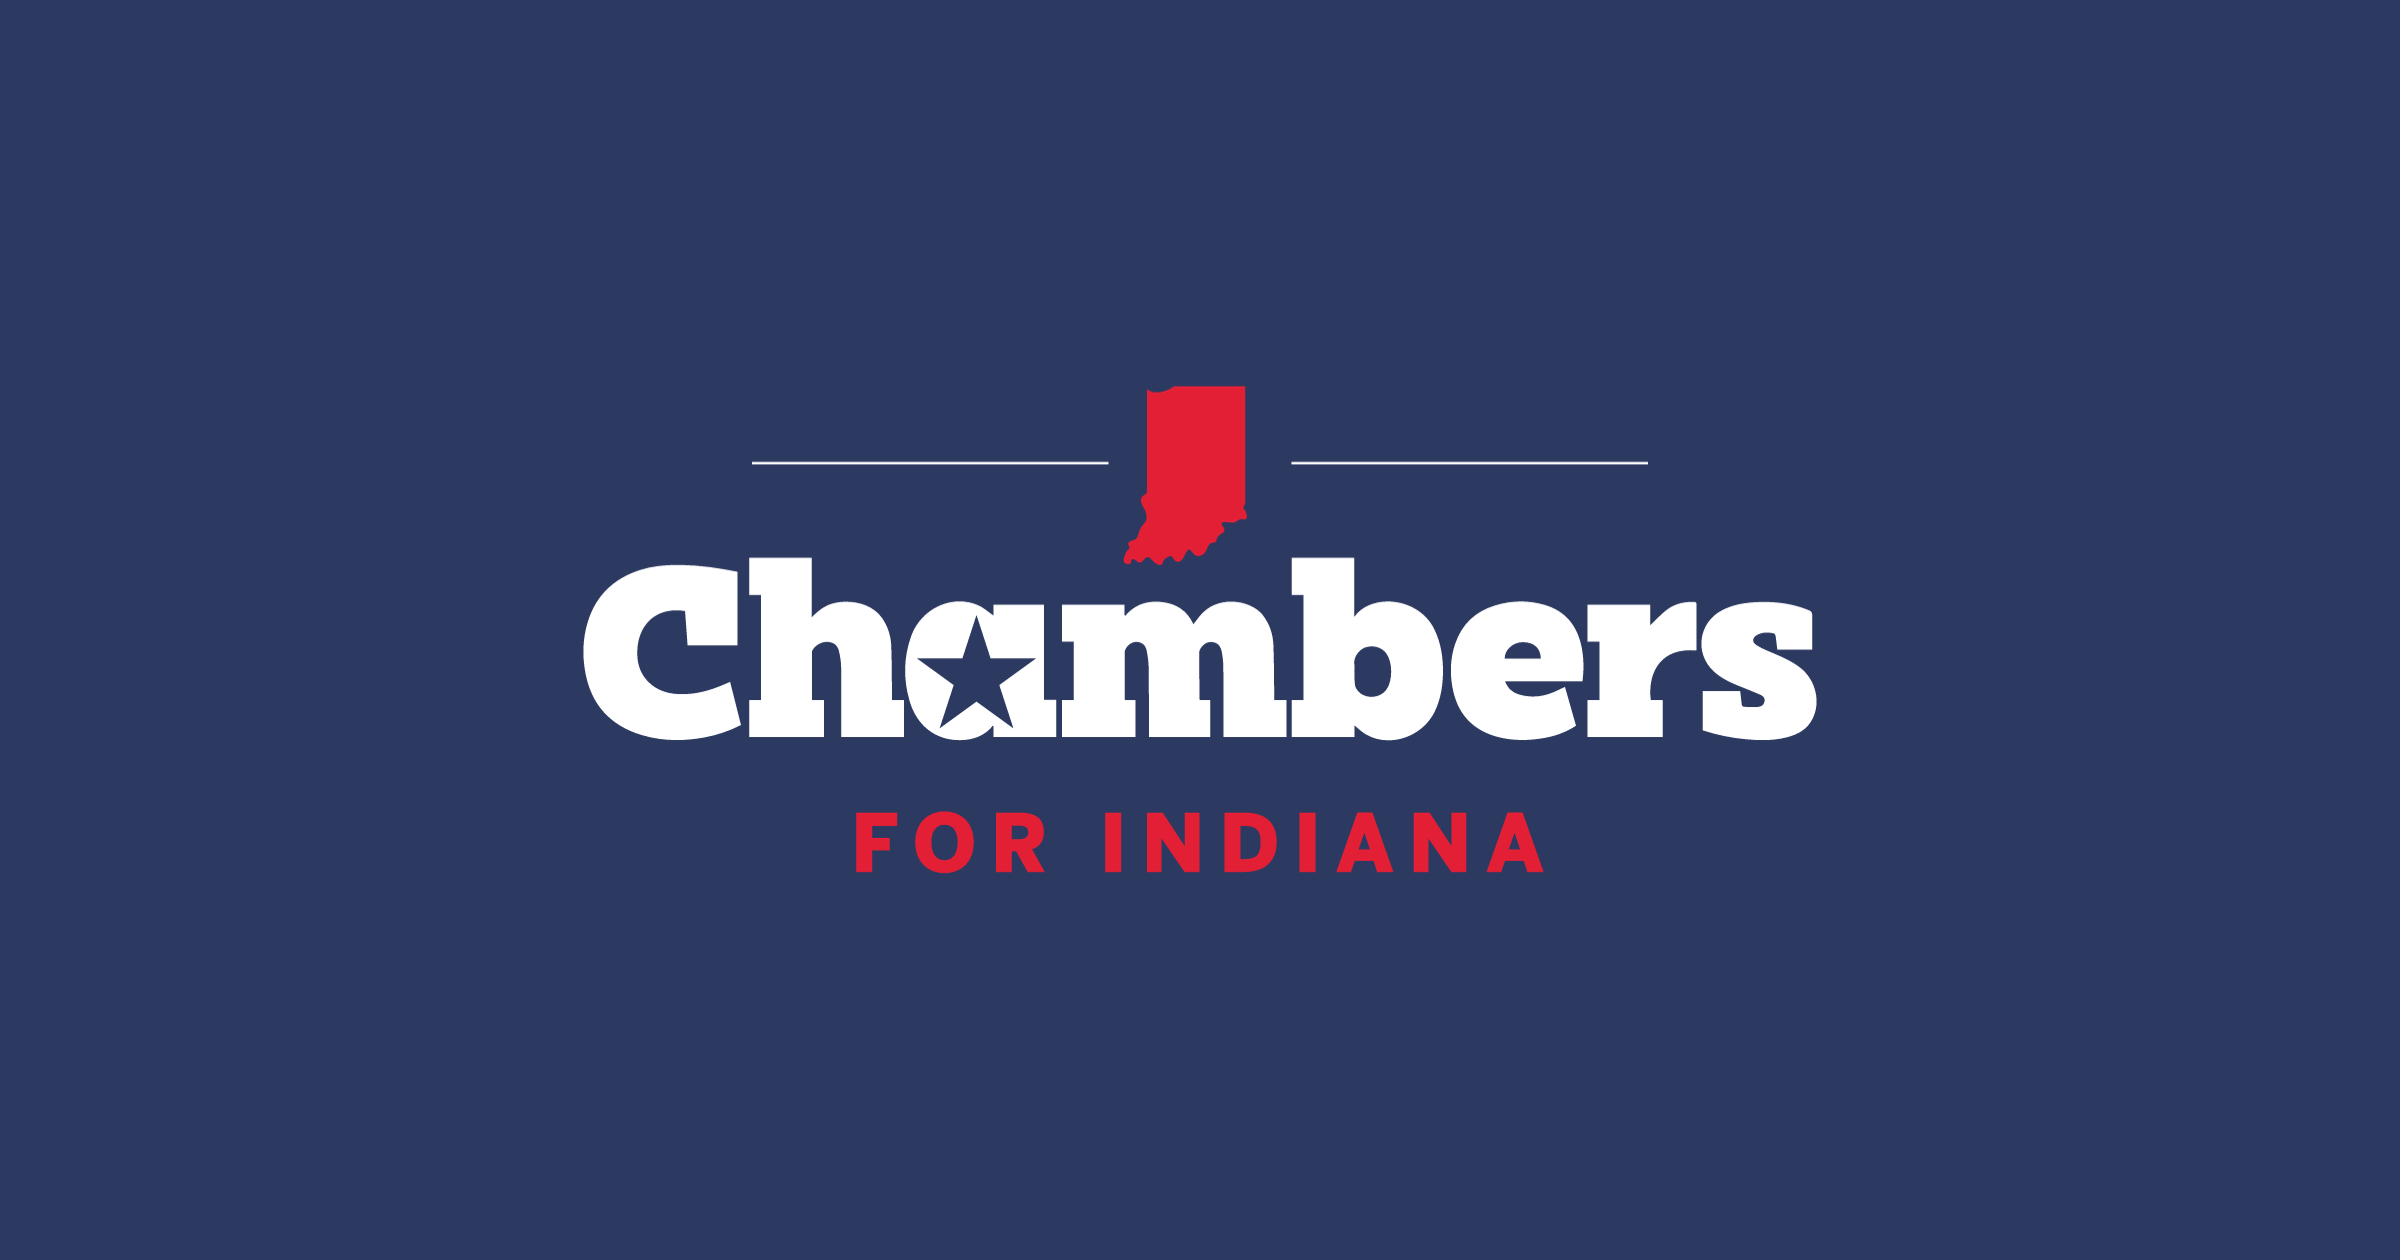 Statement by Chambers for Indiana Senior Strategist Marty Obst on the